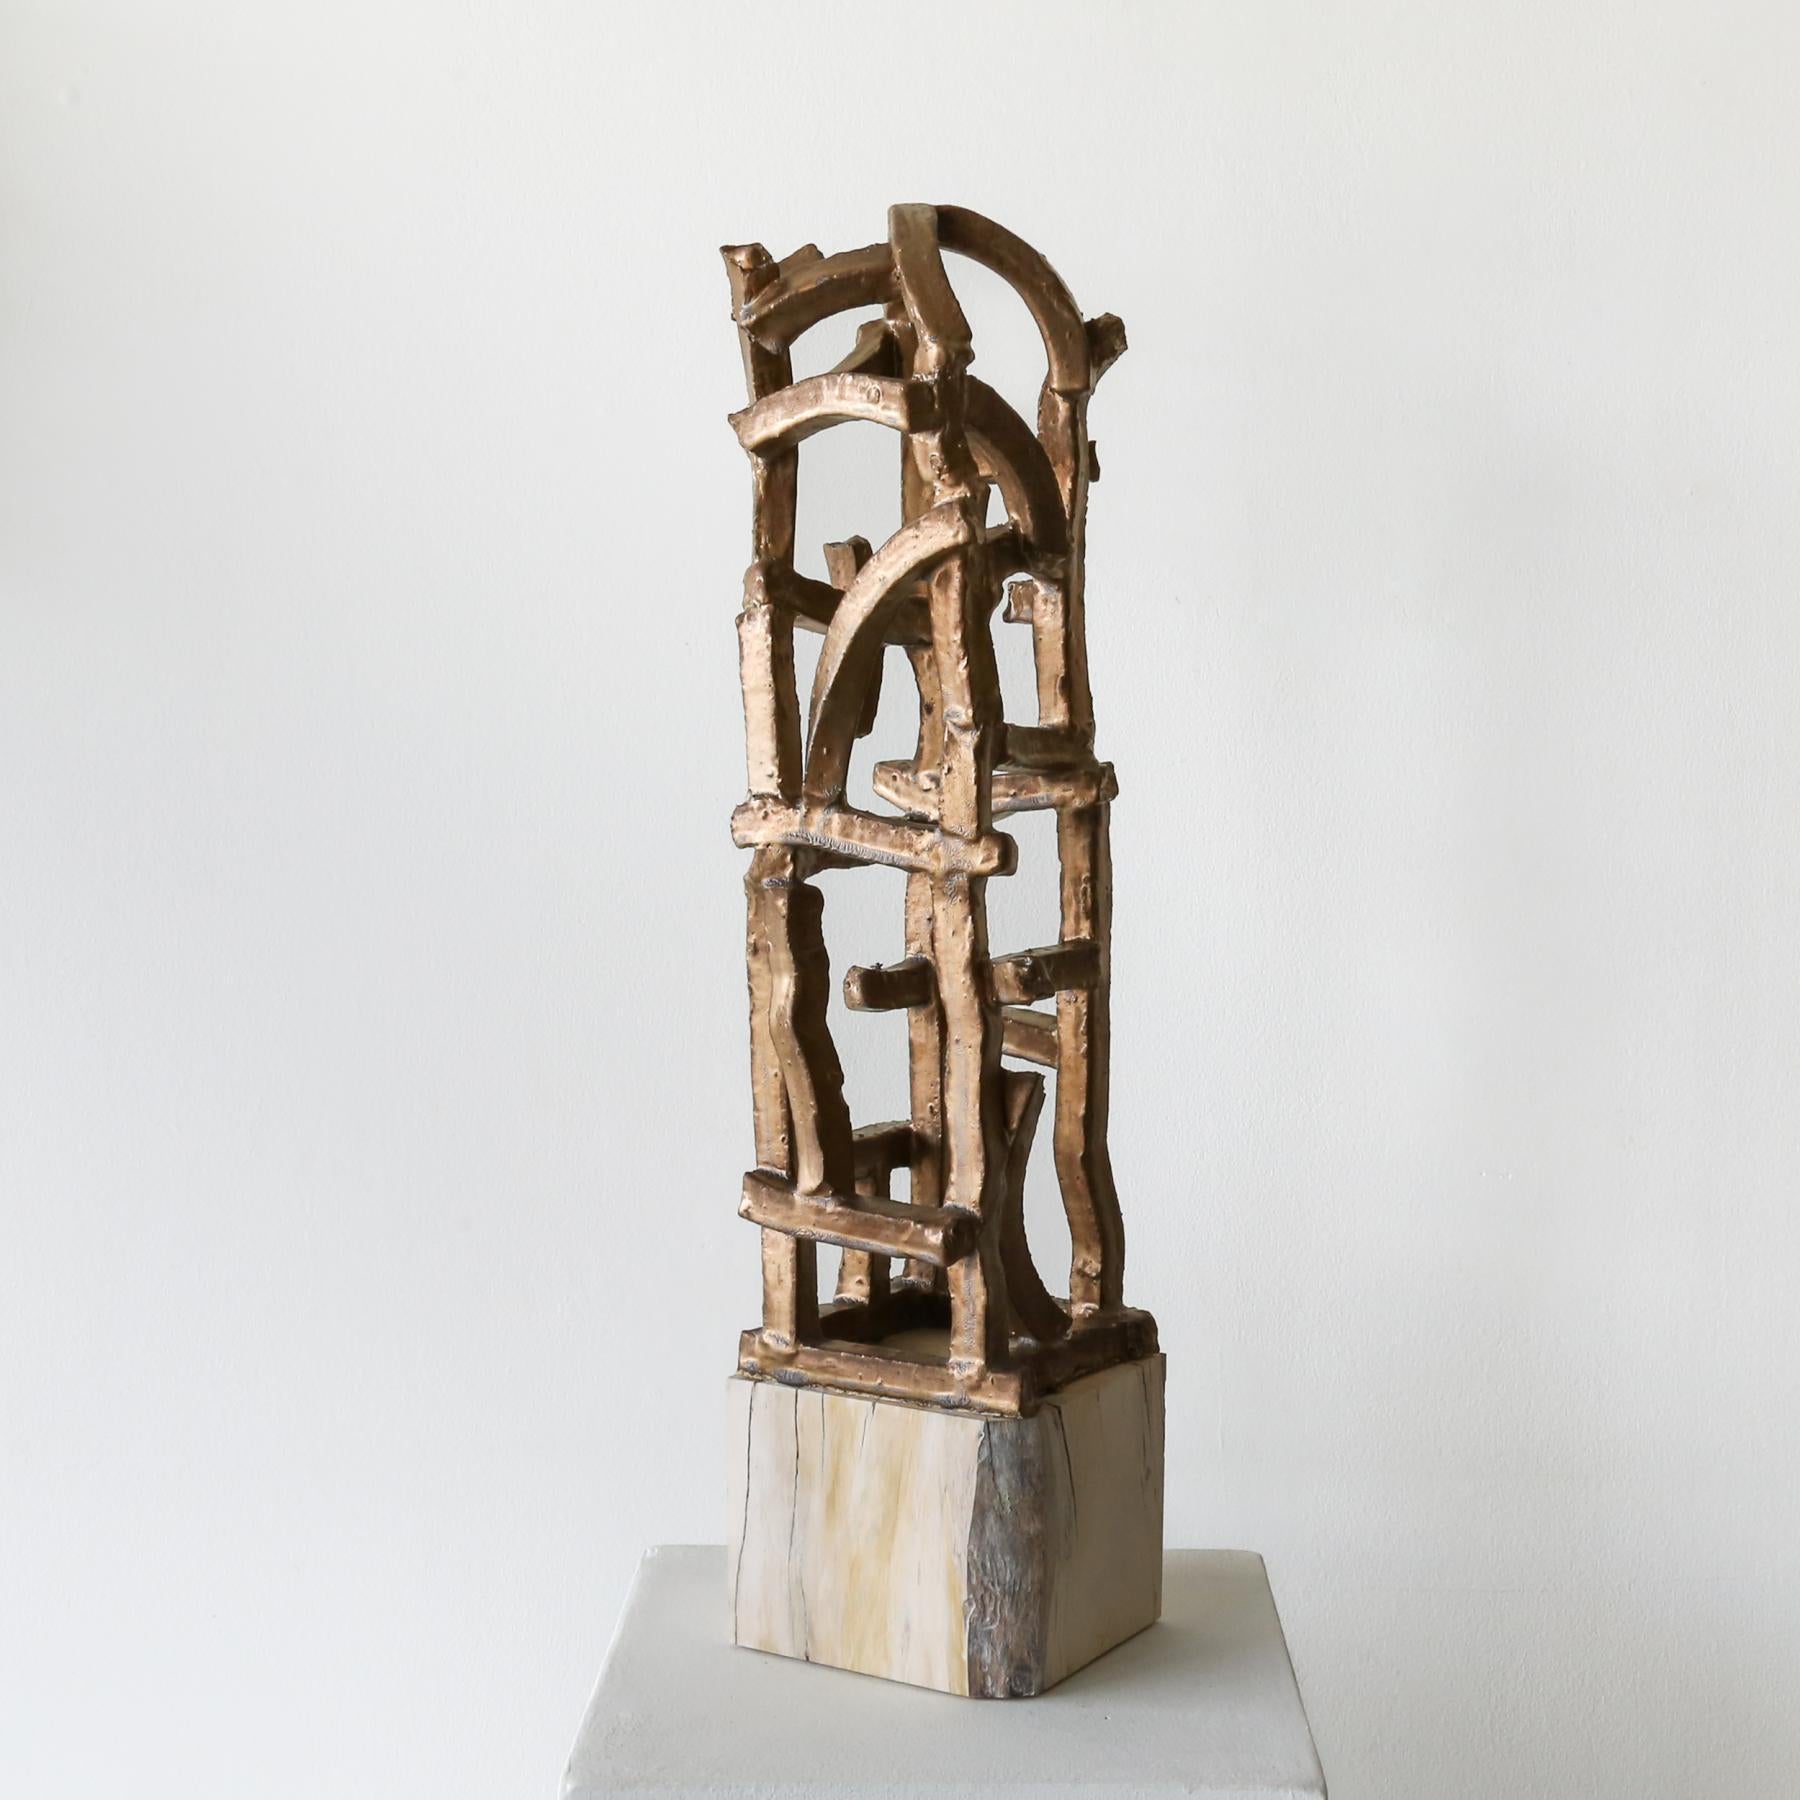 BRANDON REESE
Champ
• Glazed Stoneware and wood
7.00w x 29.50h x 7.00d in
$3,800.00